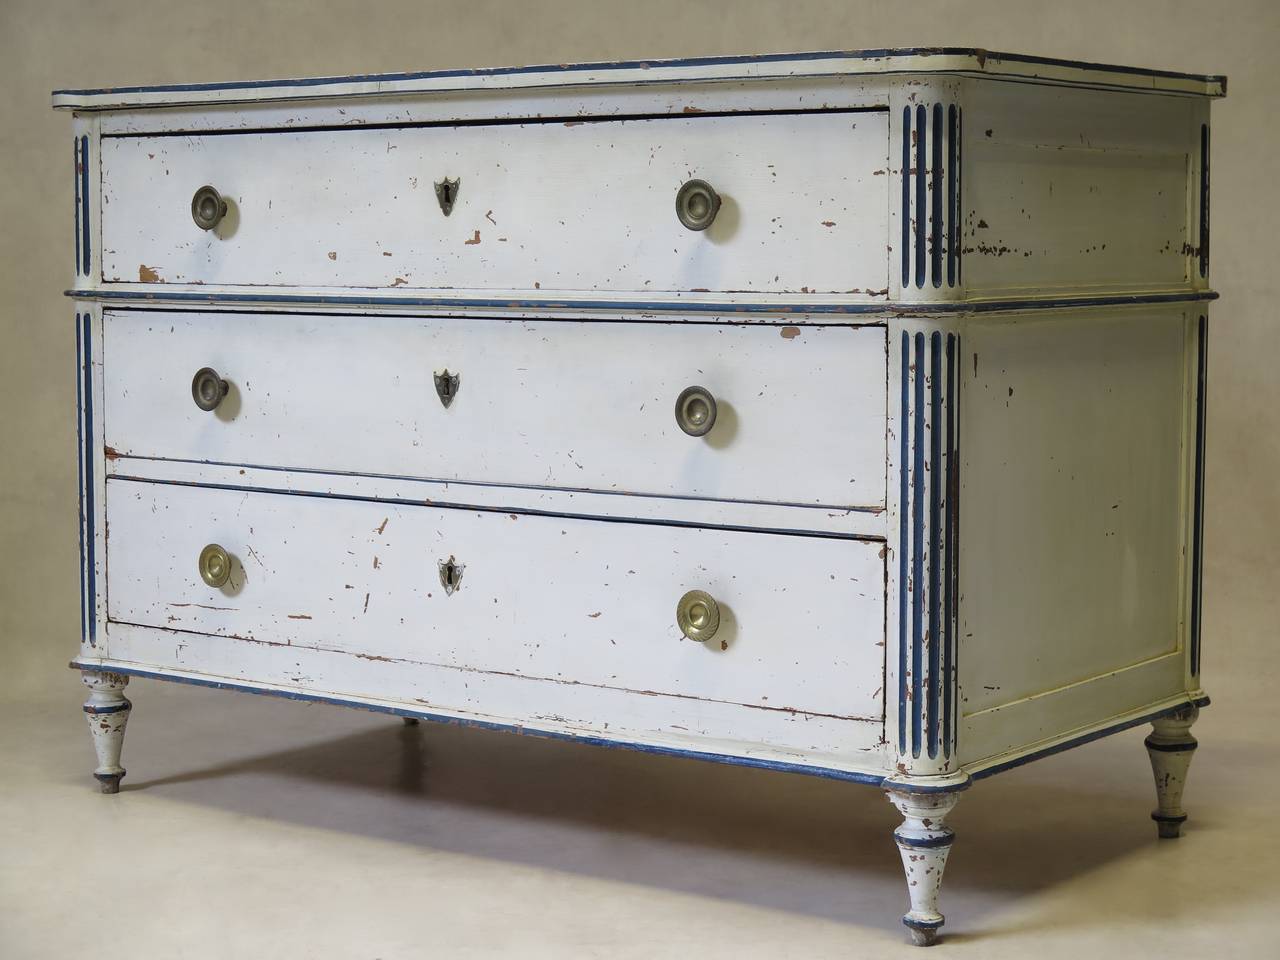 Charming Louis XVI three-drawer commode, flanked by fluted columns on either side, and raised on turned tapering feet. Round brass drawer pulls and shield-shaped keyholes. The commode was painted white a long time ago, with details elegantly picked